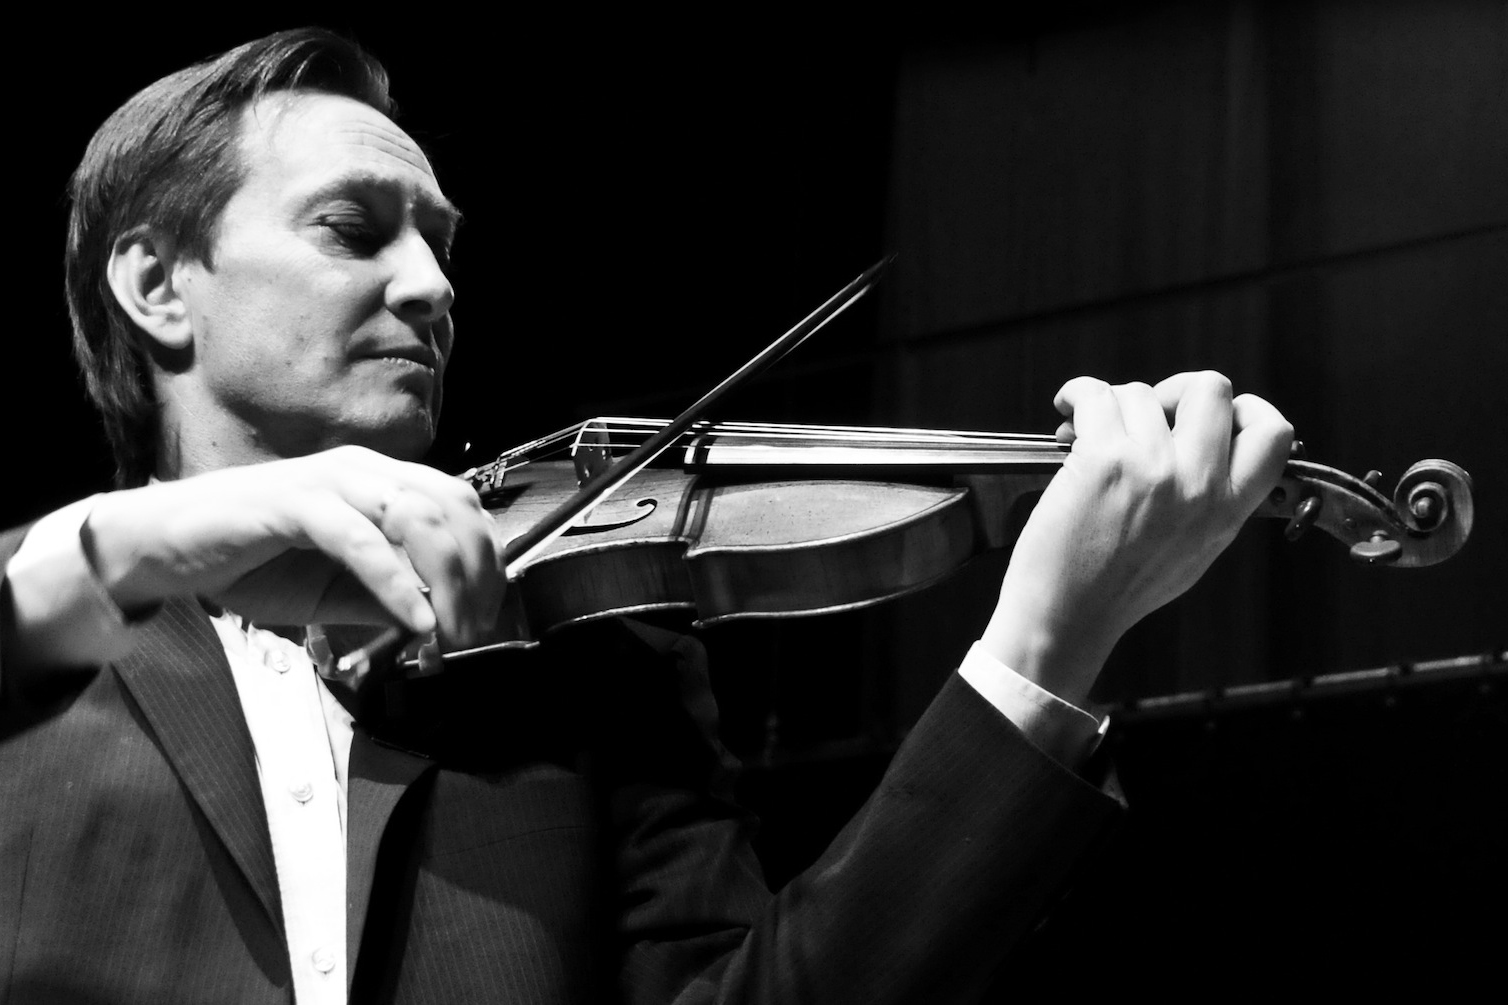 A black and white image of a man playing the violin